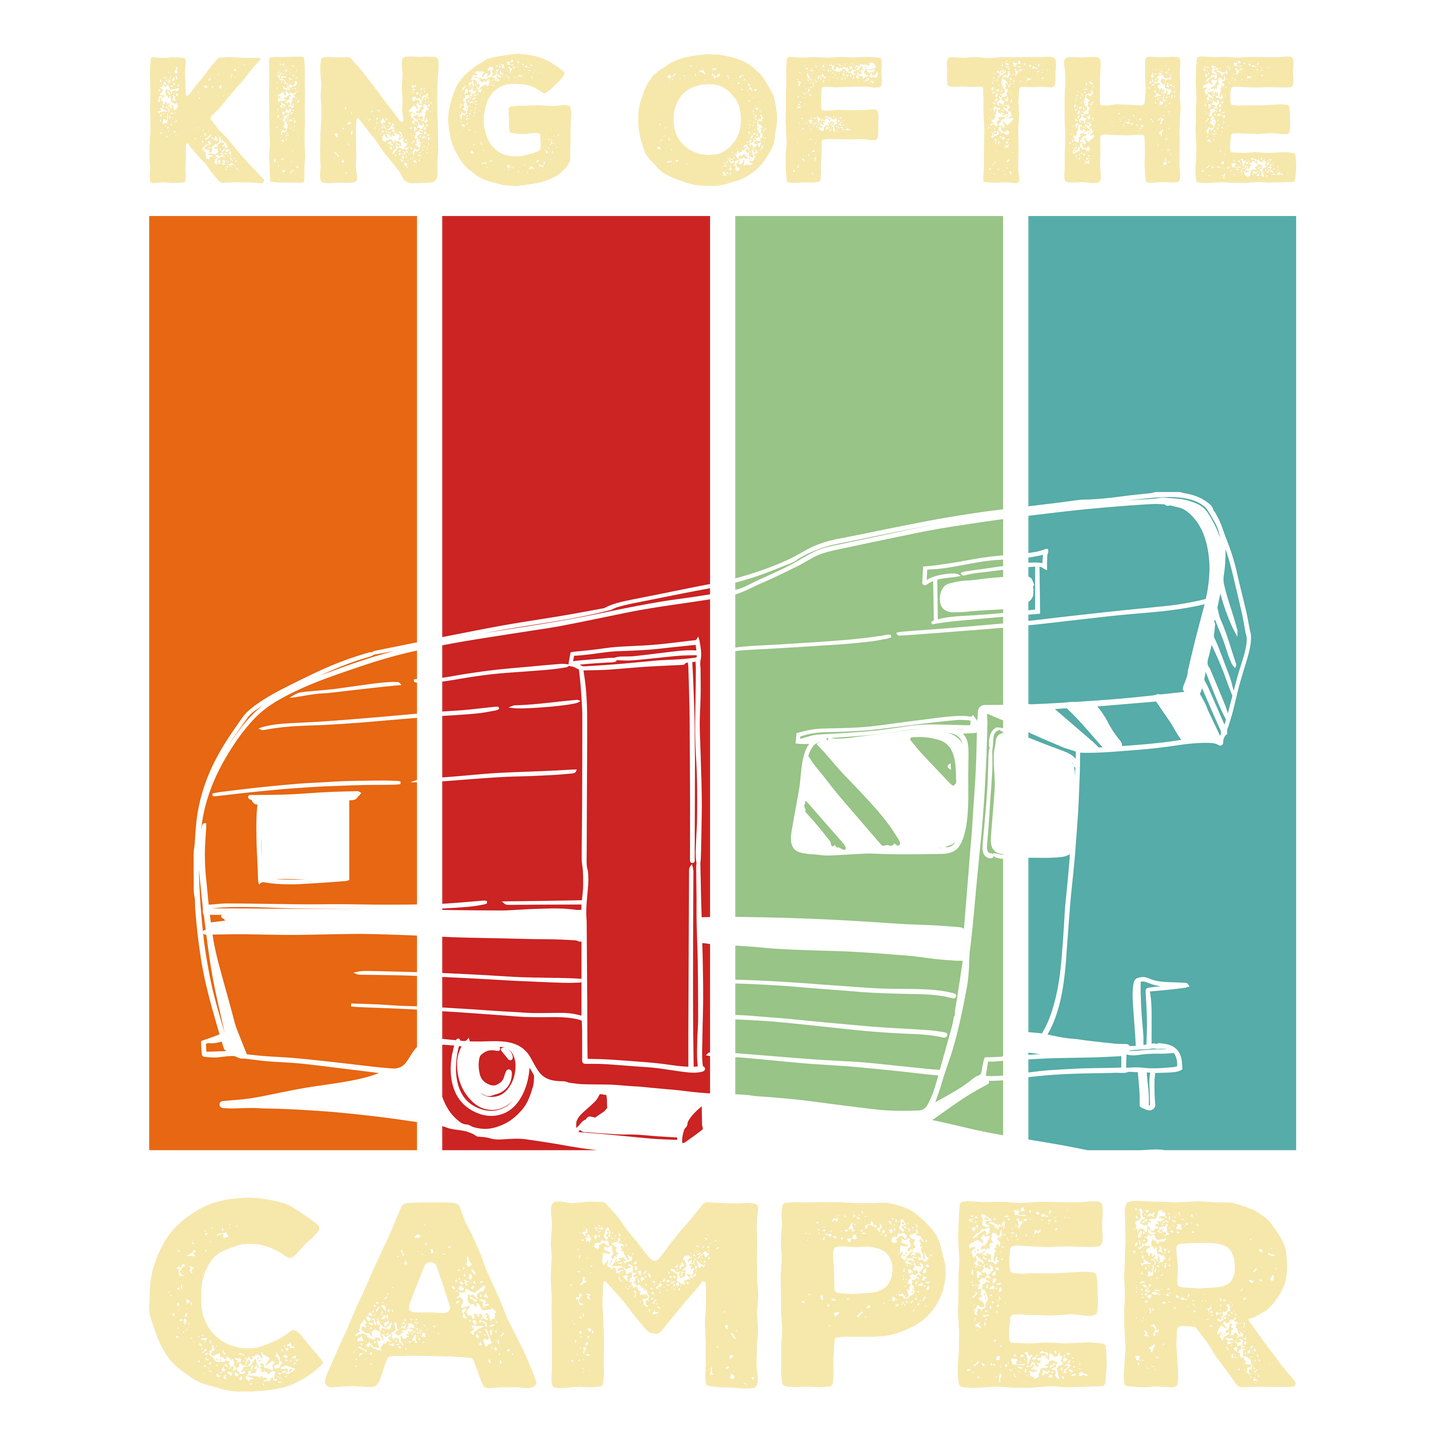 KING OF THE CAMPER